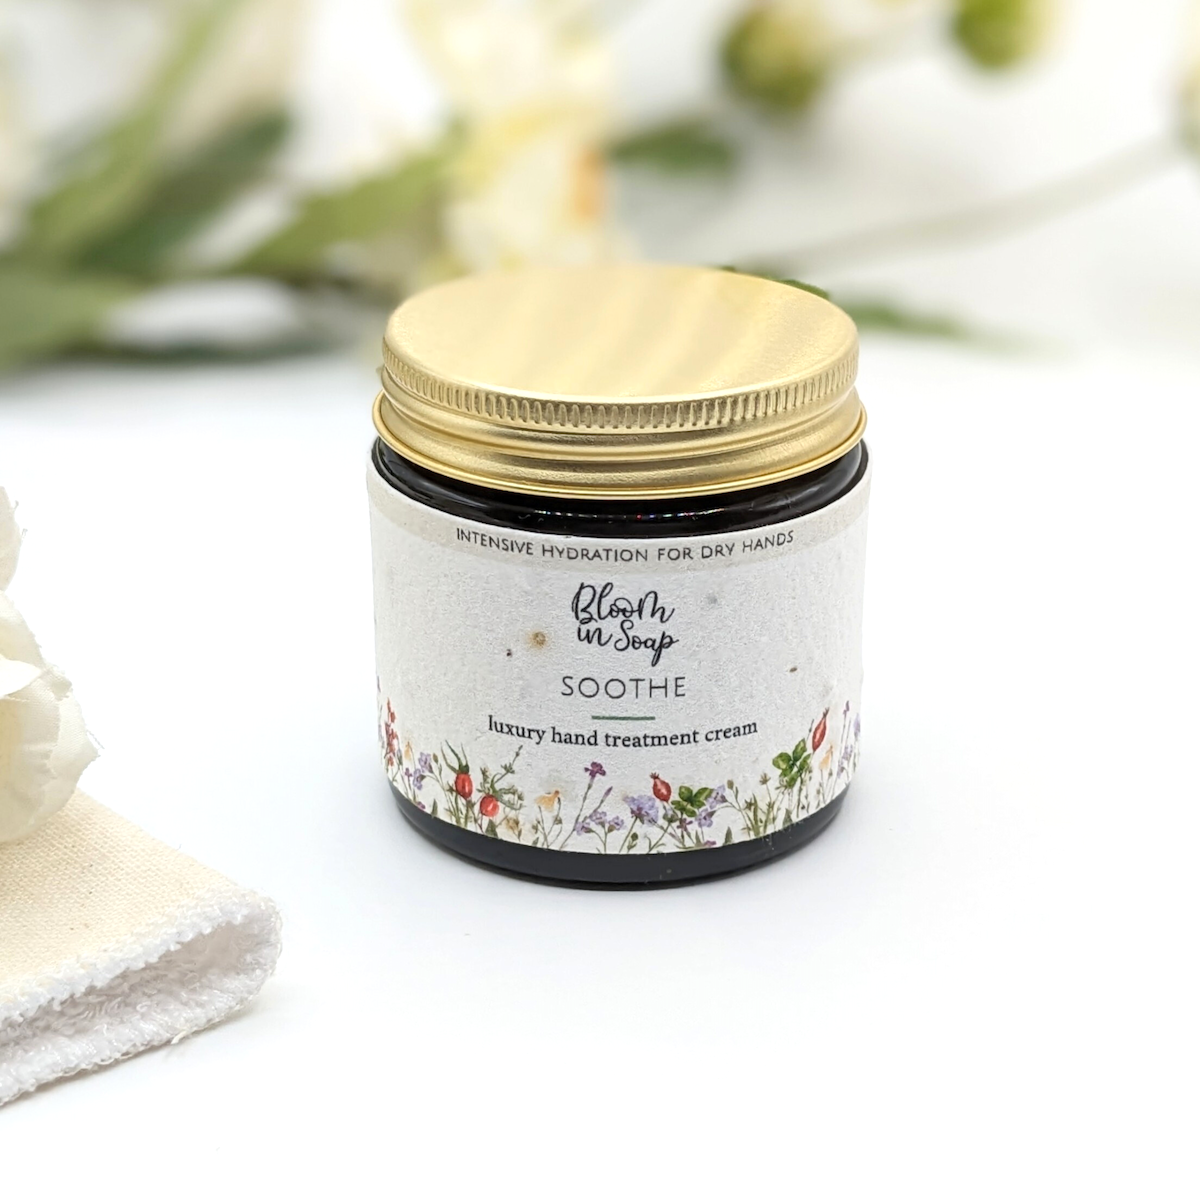 Soothe luxury hand treatment cream from Bloom In Soap